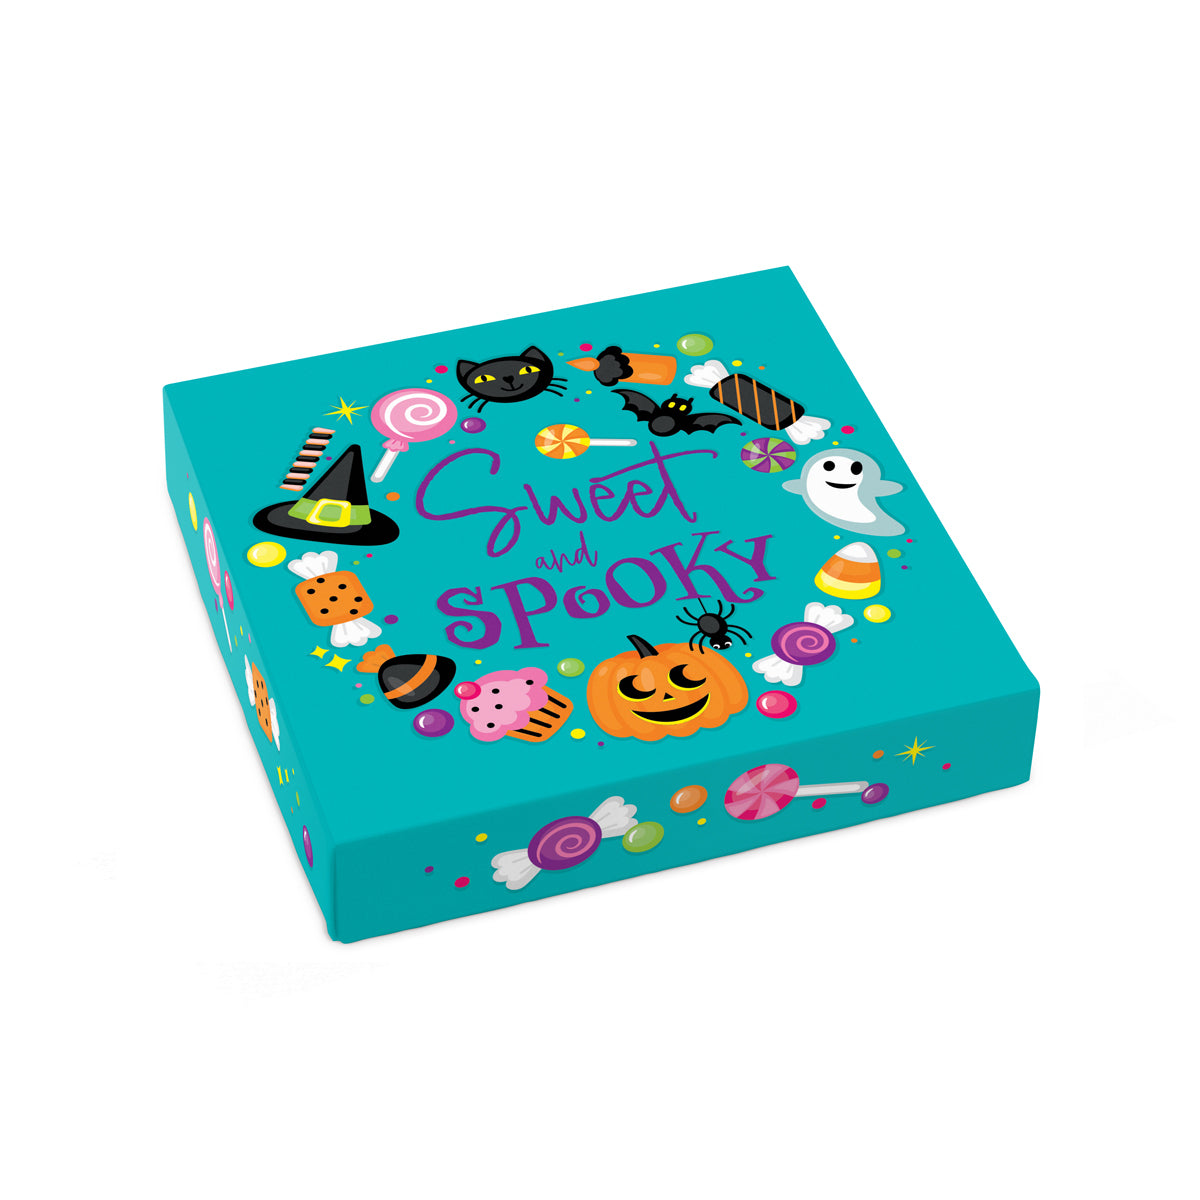 Sweet and Spooky 16 piece assortment cover with cartoon Halloween images